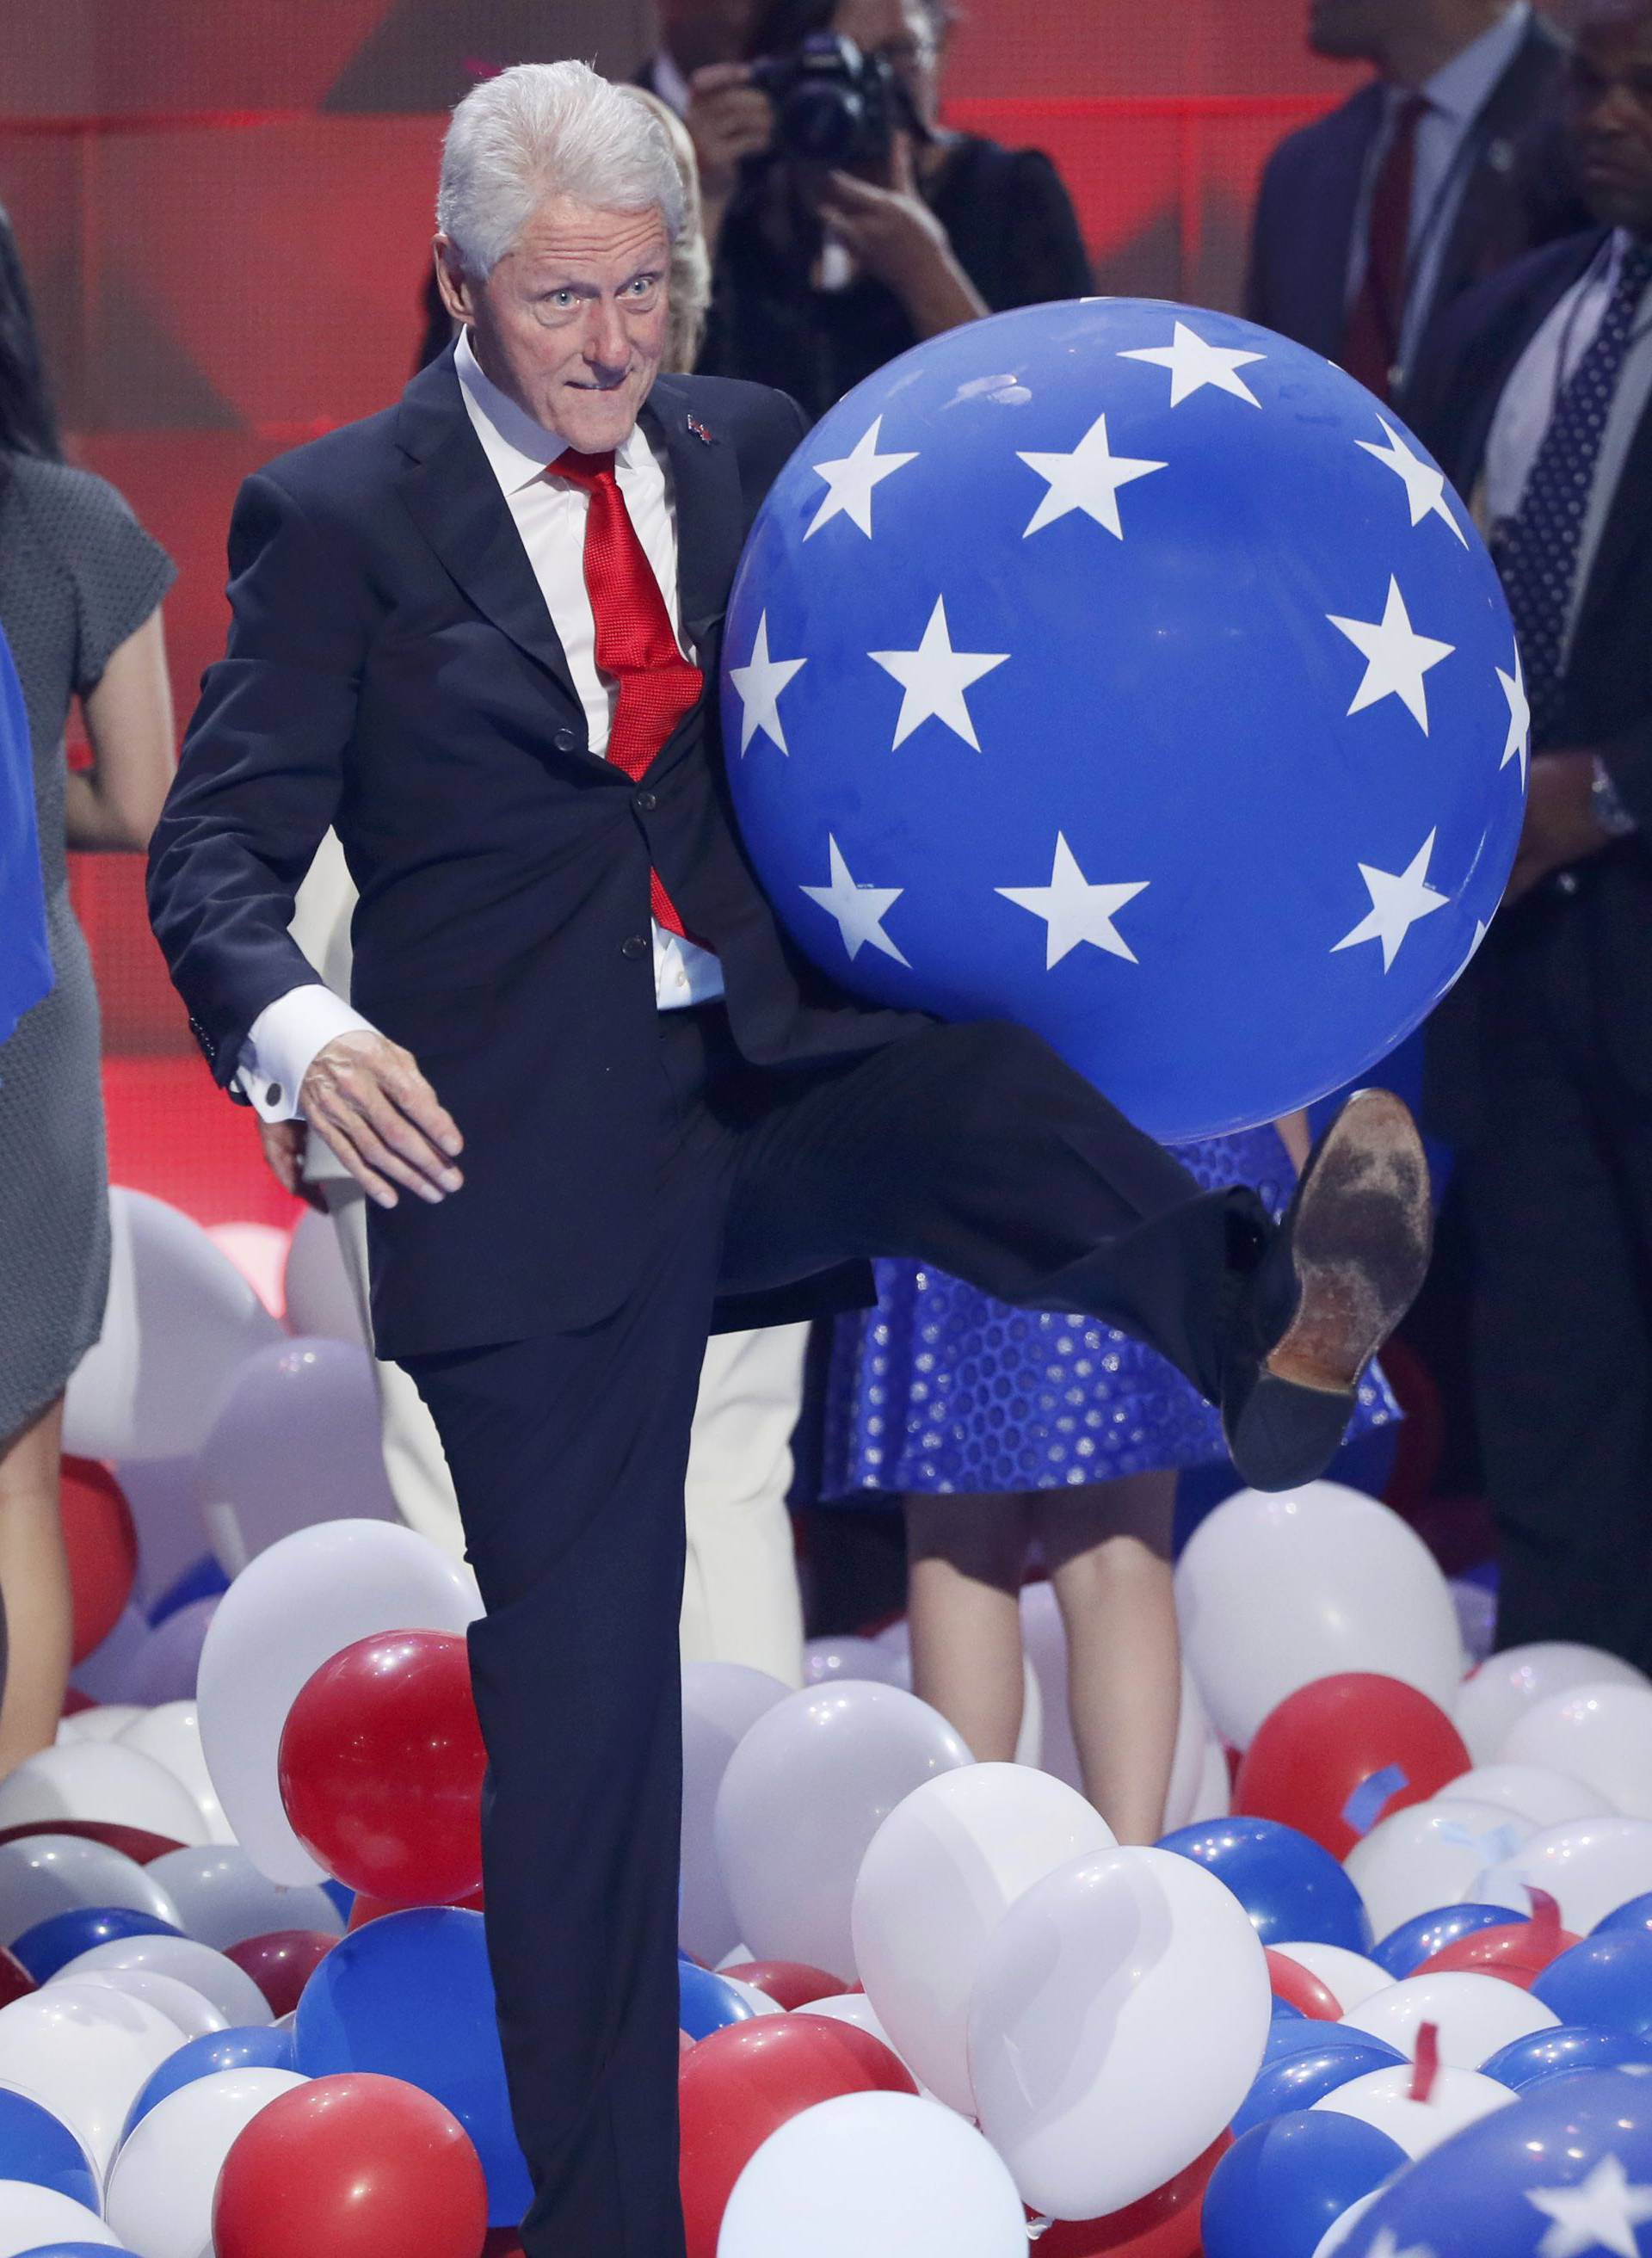 Former U.S. President Bill Clinton kicks ballons during celebrations onstage after his wife Democratic presidential nominee Hillary Clinton accepted the nomination on the fourth and final night at the Democratic National Convention in Philadelphia